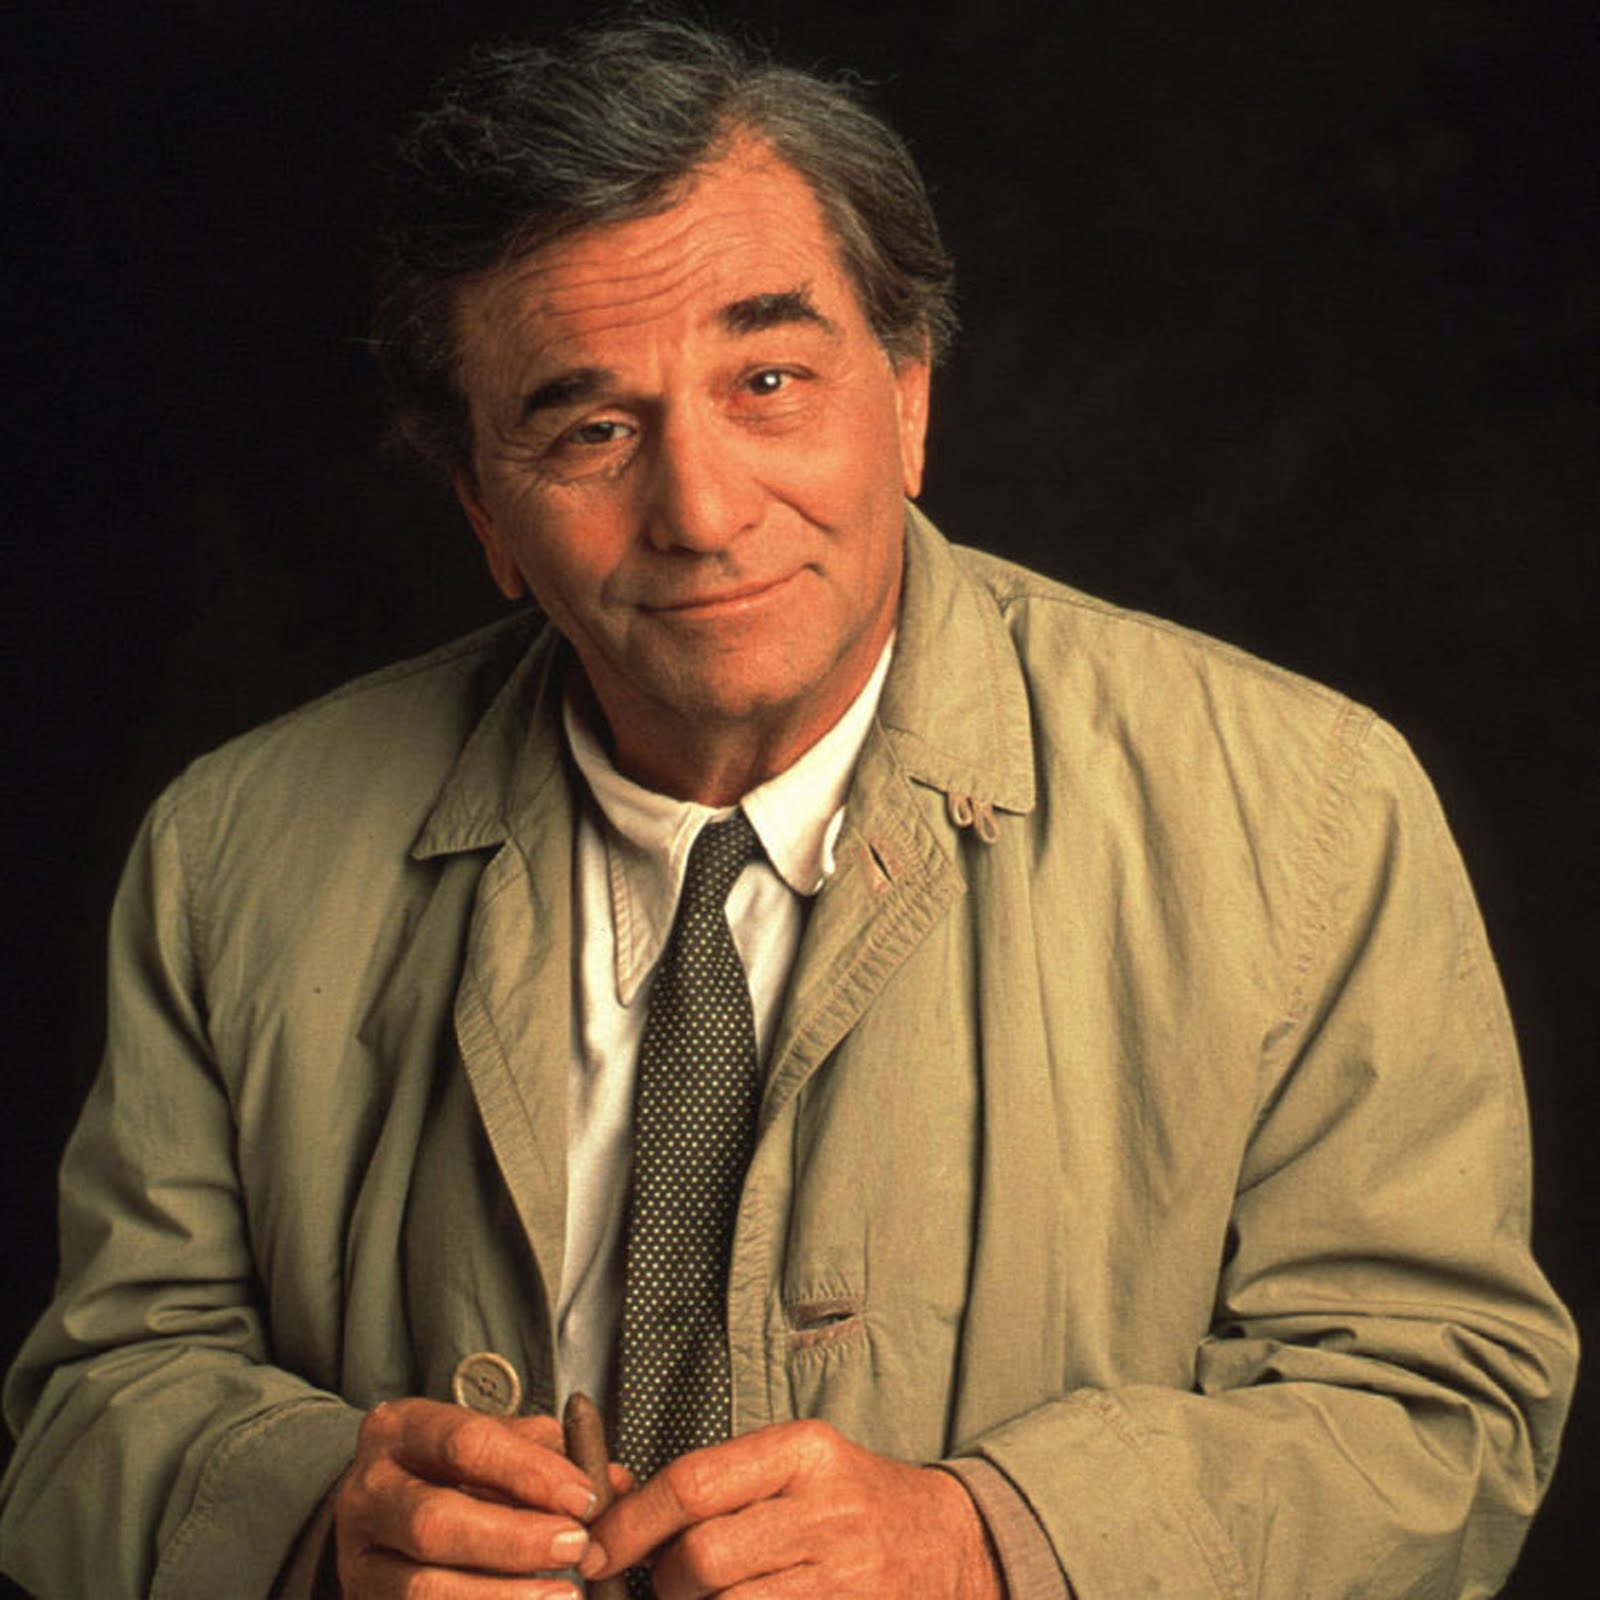 Playing a dishevelled police detective in Columbo is what the late actor Peter Falk is most remembered for.